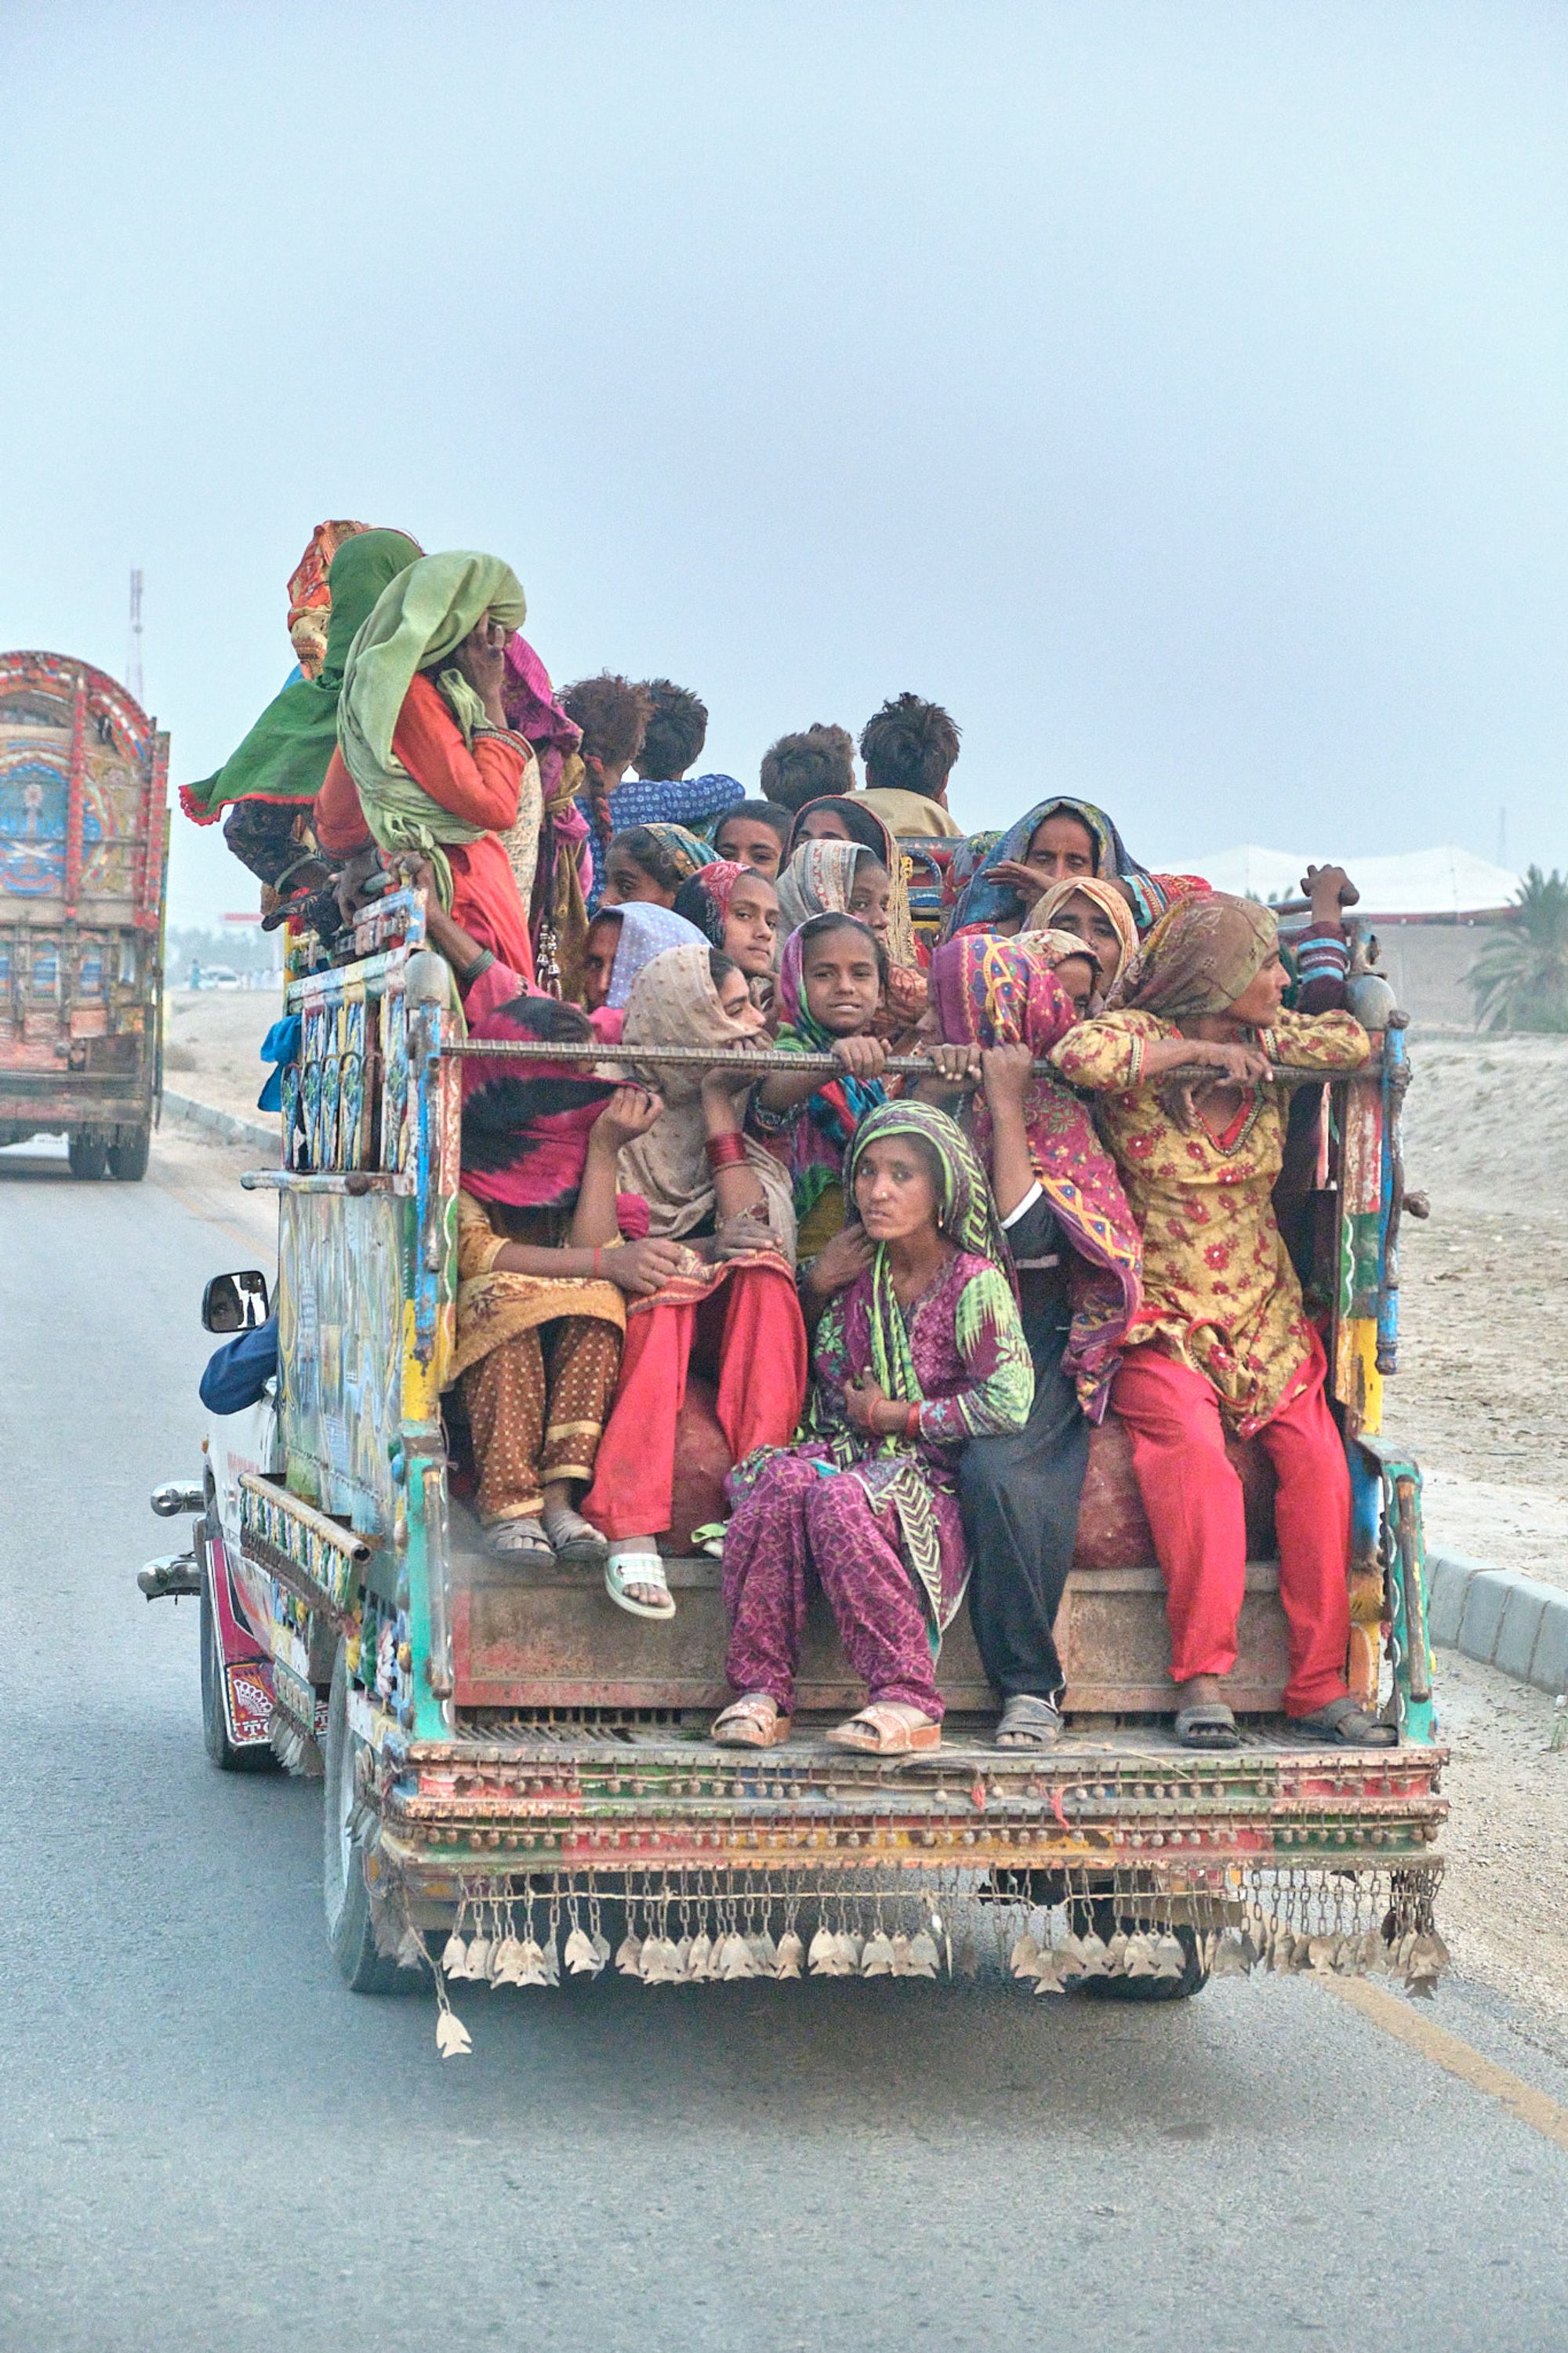 A group of girls and women on a truck